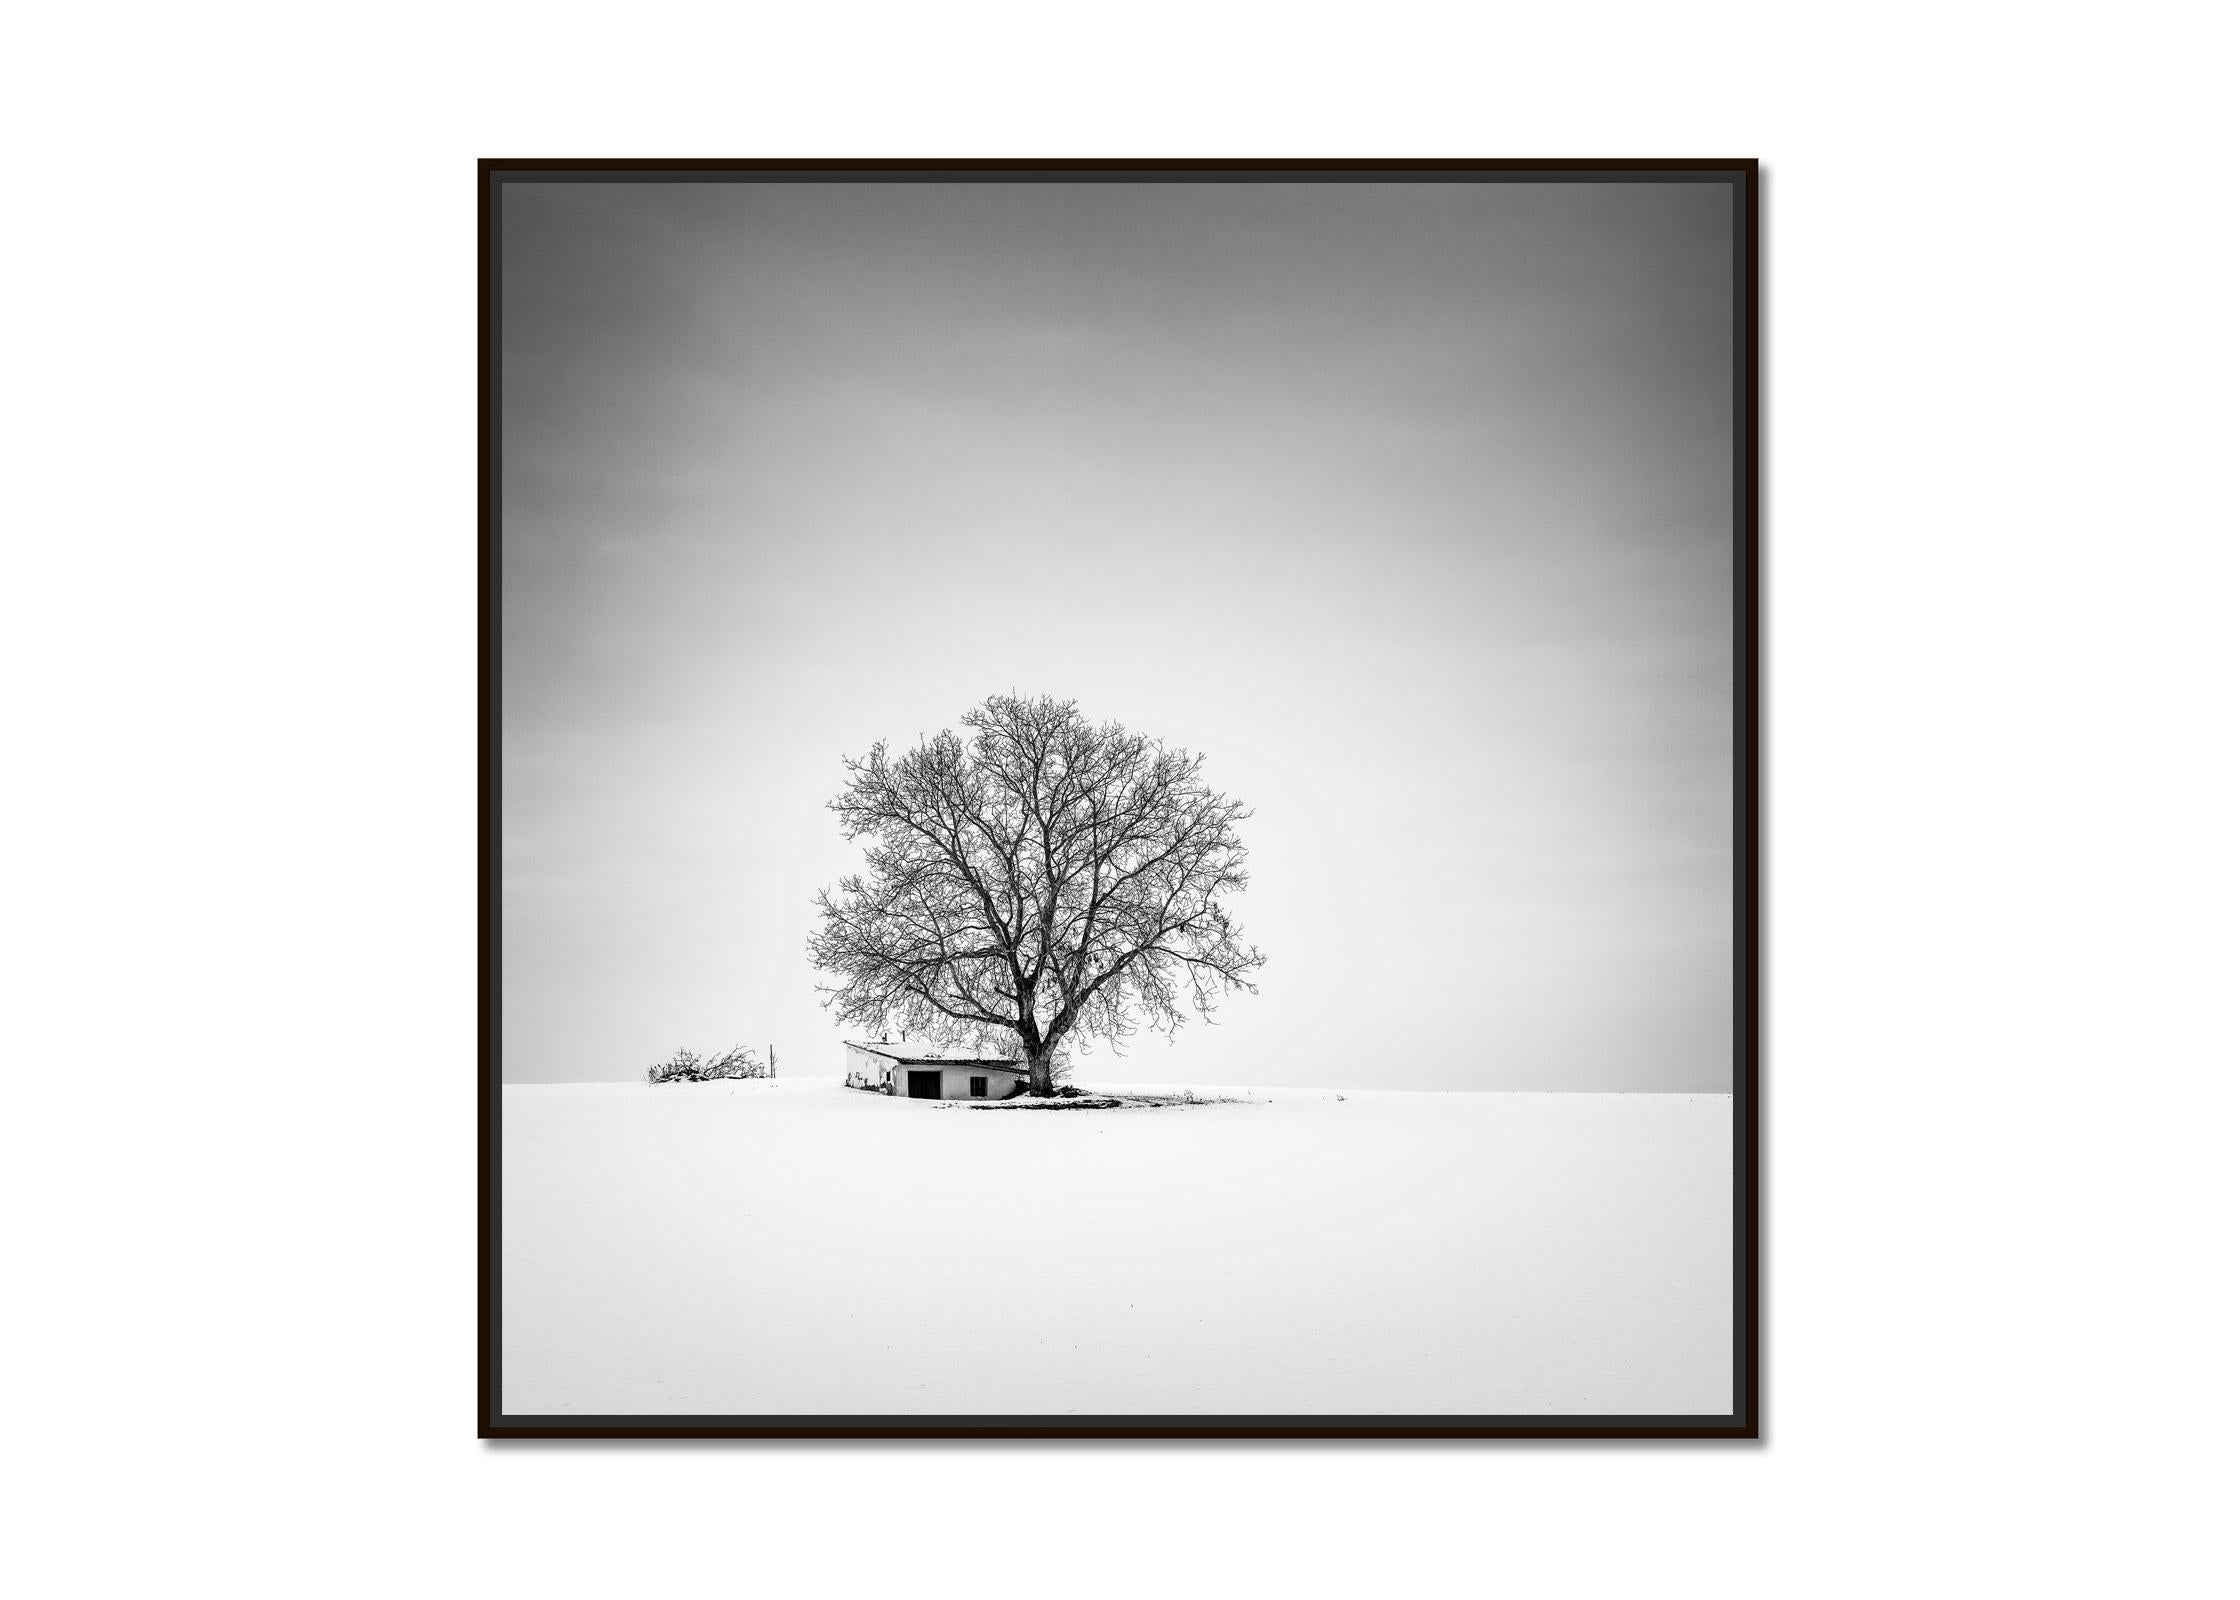 Wine Press House, snow, winter, black and white fine art landscape photography - Photograph by Gerald Berghammer